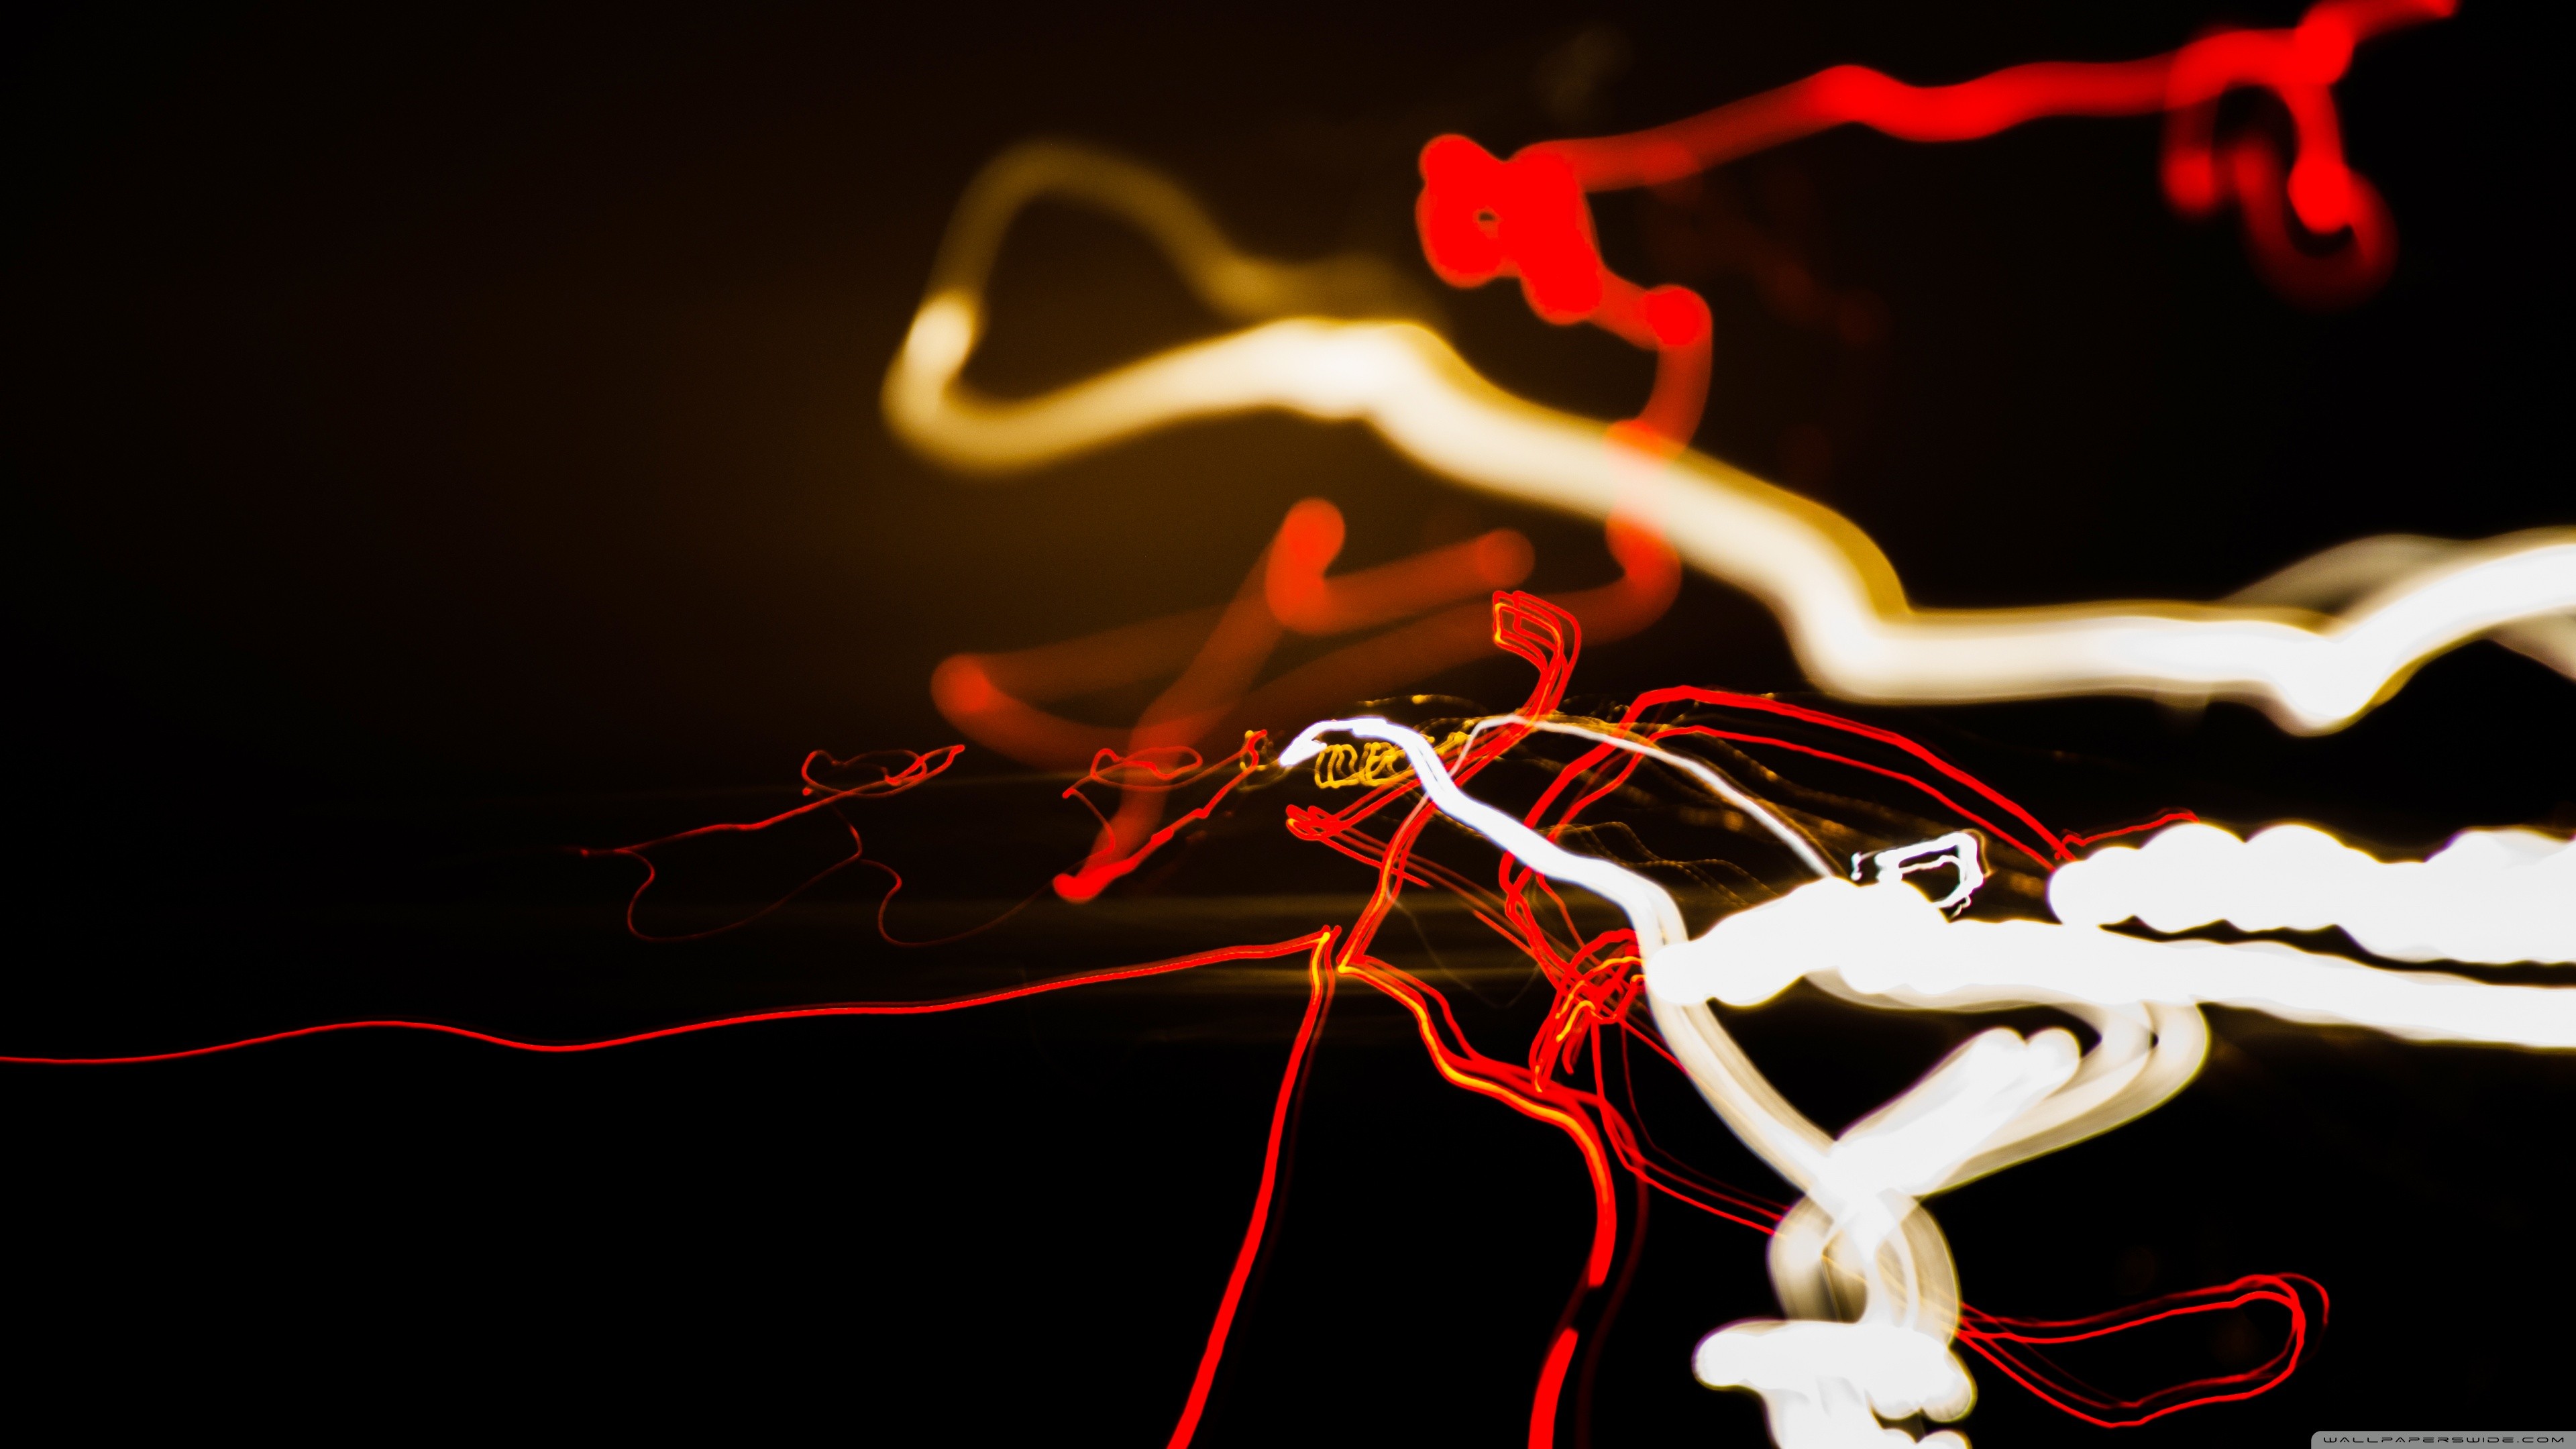 General 3840x2160 light trails light painting abstract streaks digital art lines shapes